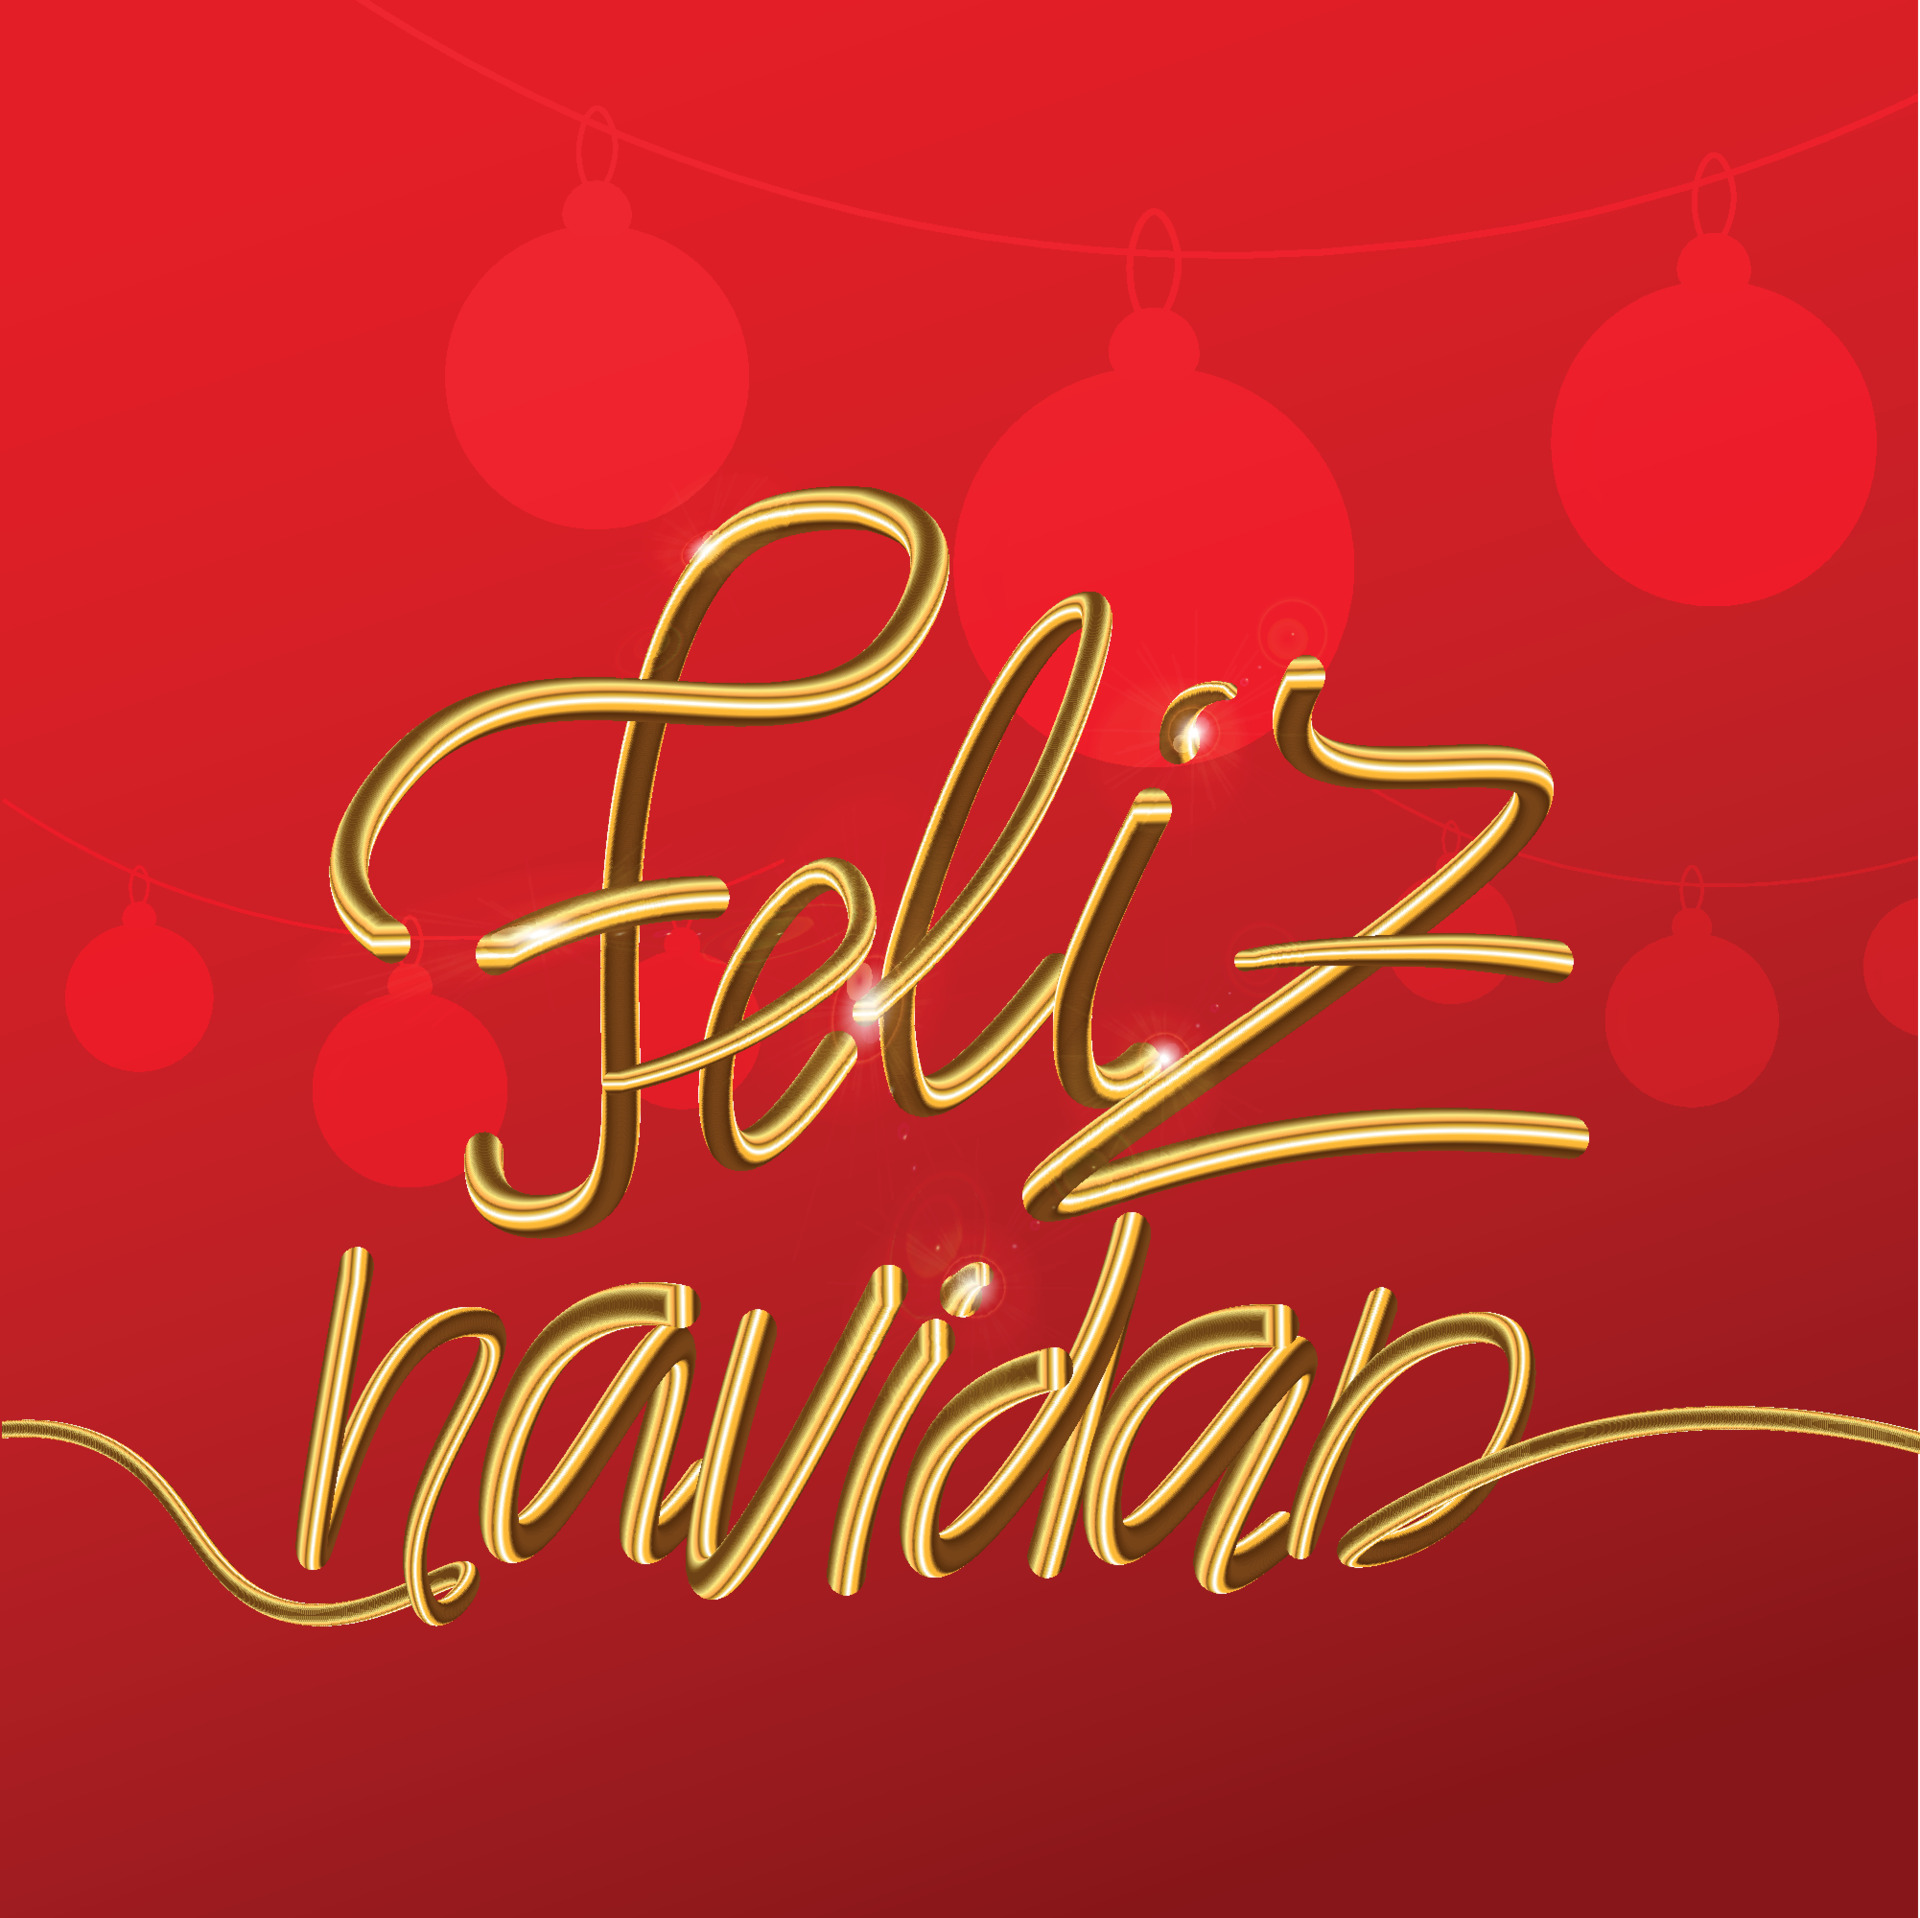 Feliz Navidad Spanish Merry Christmas Holiday Golden Decoration And Calligraphy Font For Greeting Card Red Background Vector Or New Year Shiny Gift Xmas Design 7365277 Art At